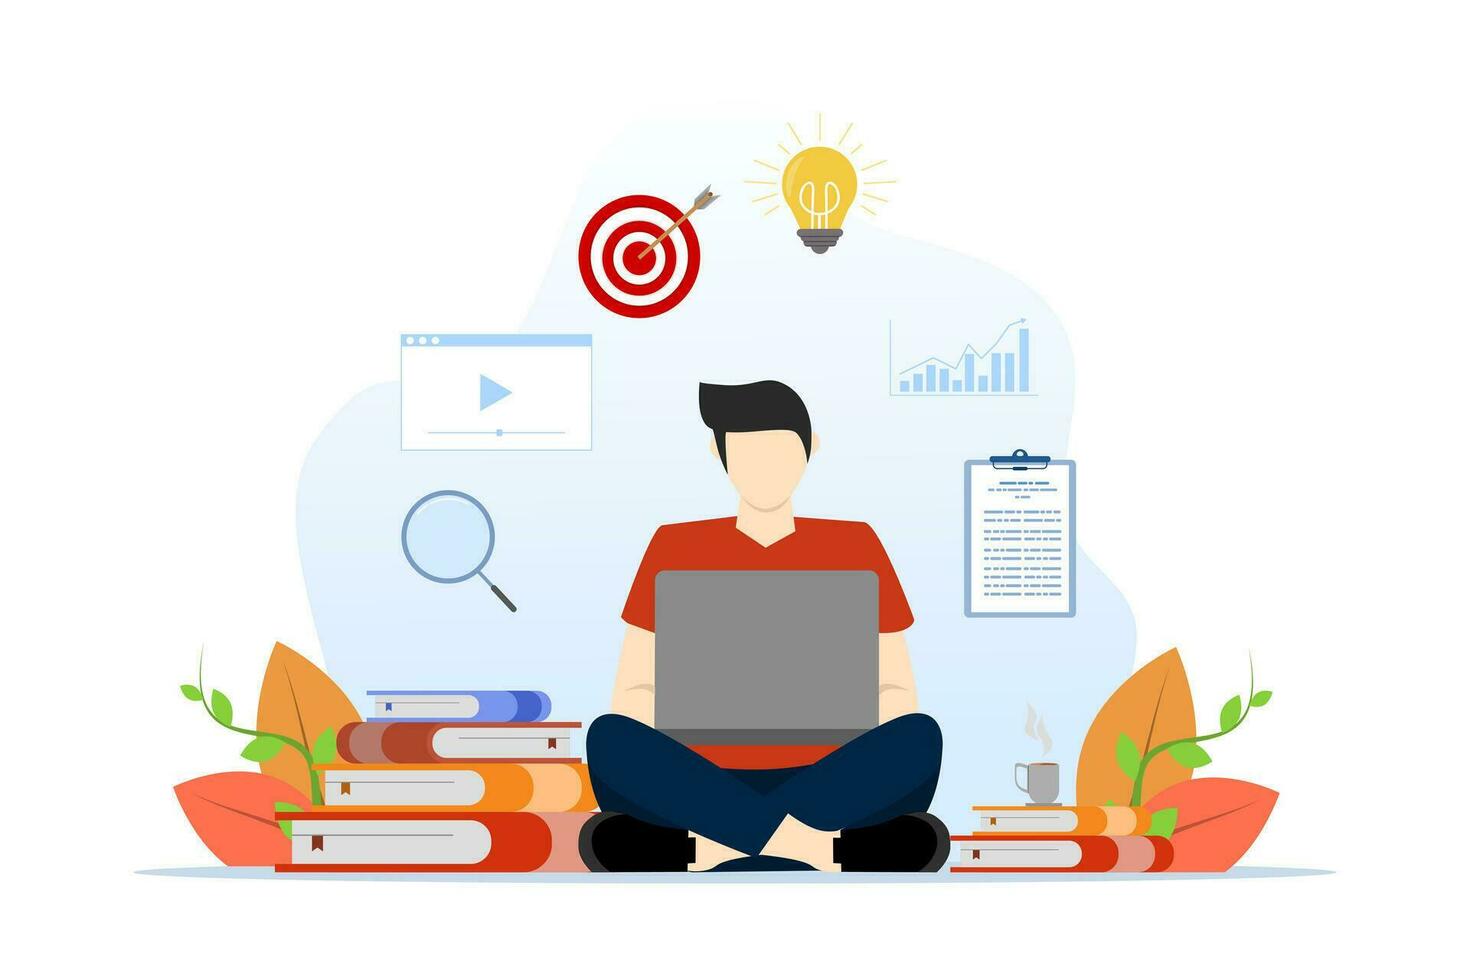 concept of designing remote work technology for online education and learning and student using computer to study. Online education for students. Flat vector illustration on a white background.